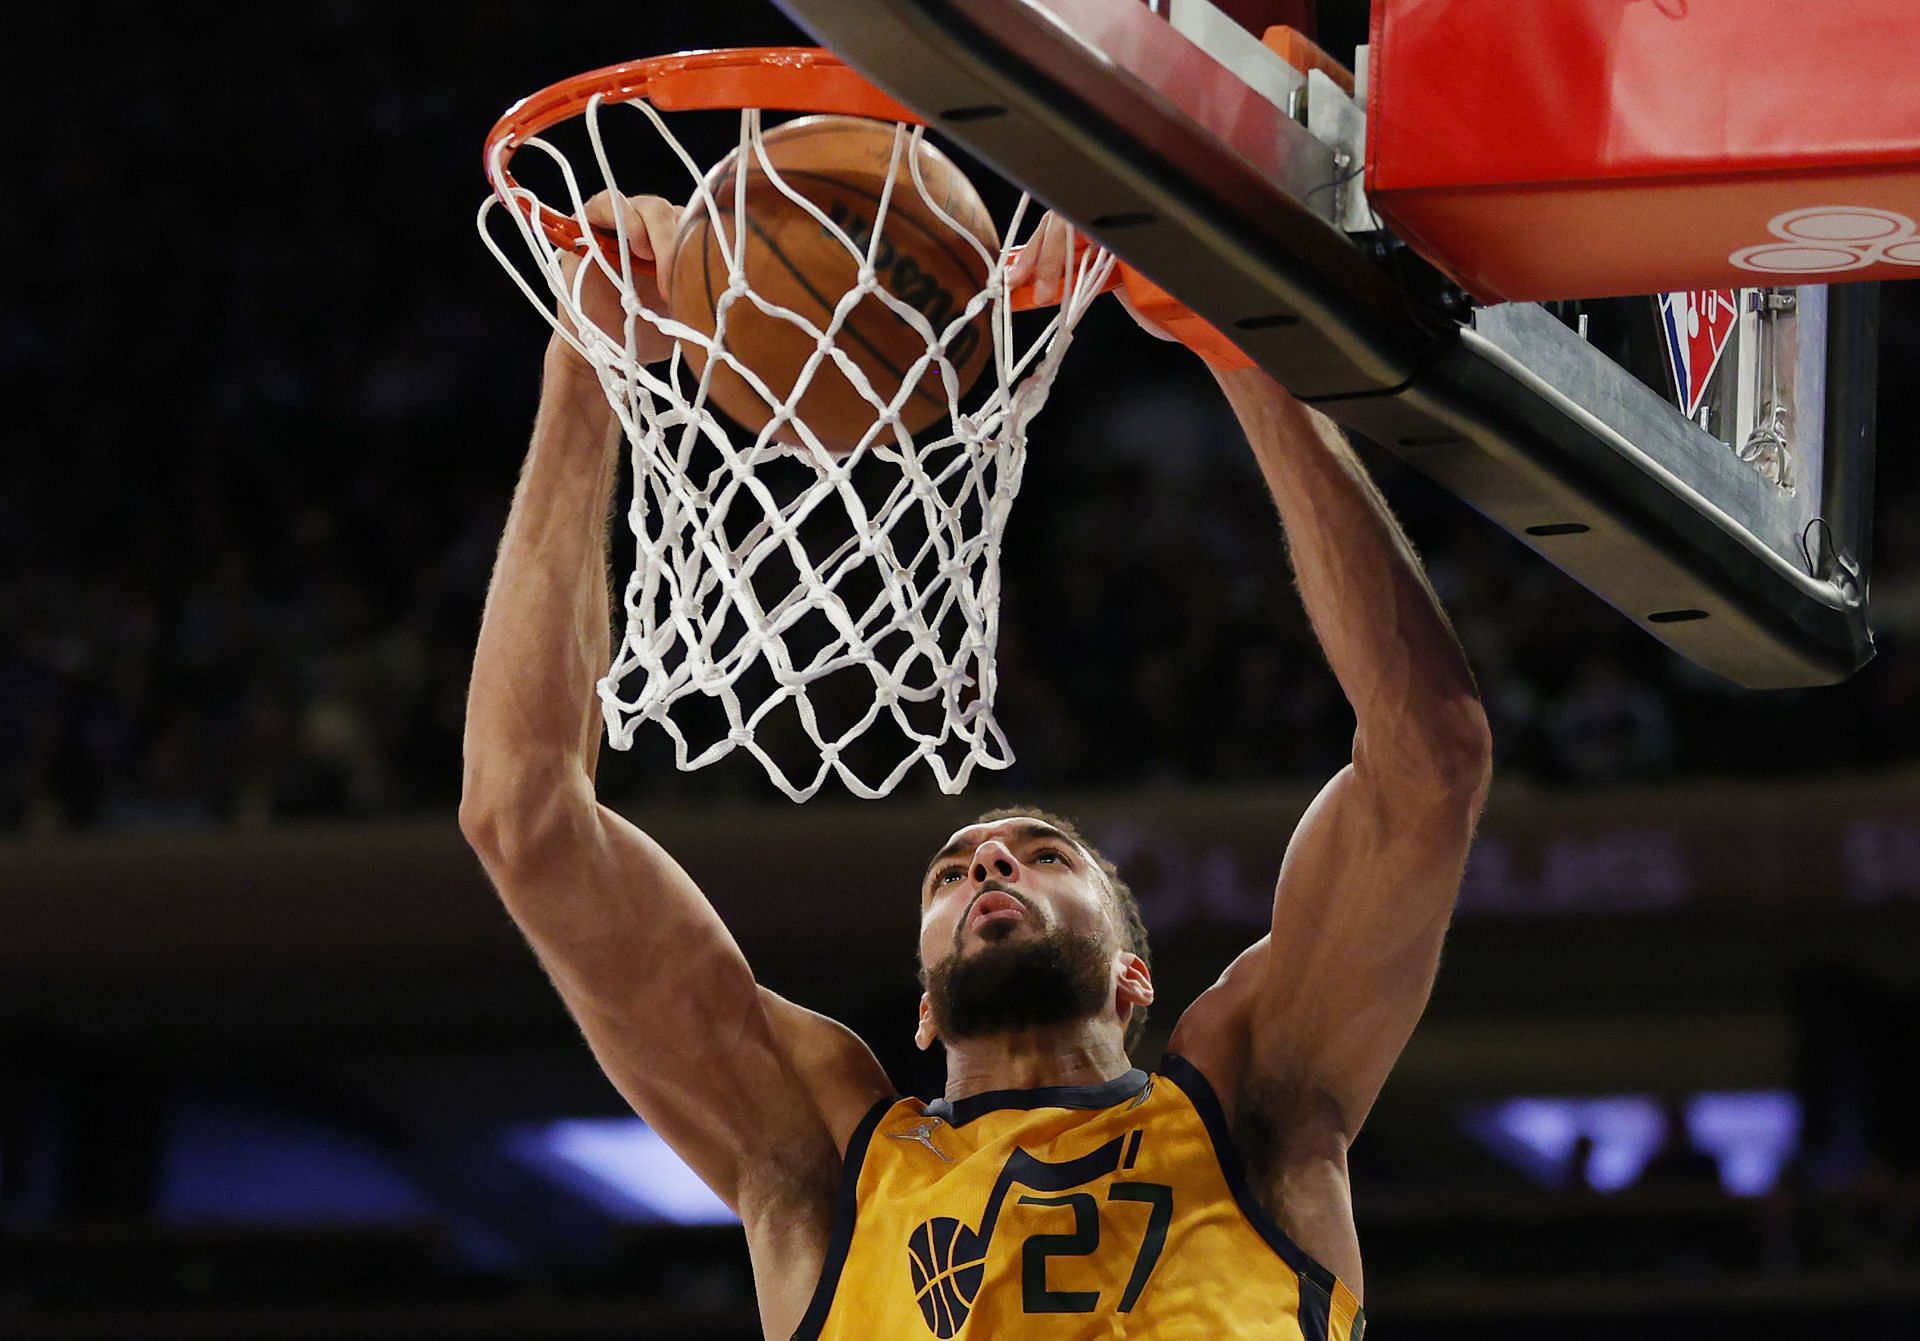 Utah Jazz center Rudy Gobert slams it in for two points.